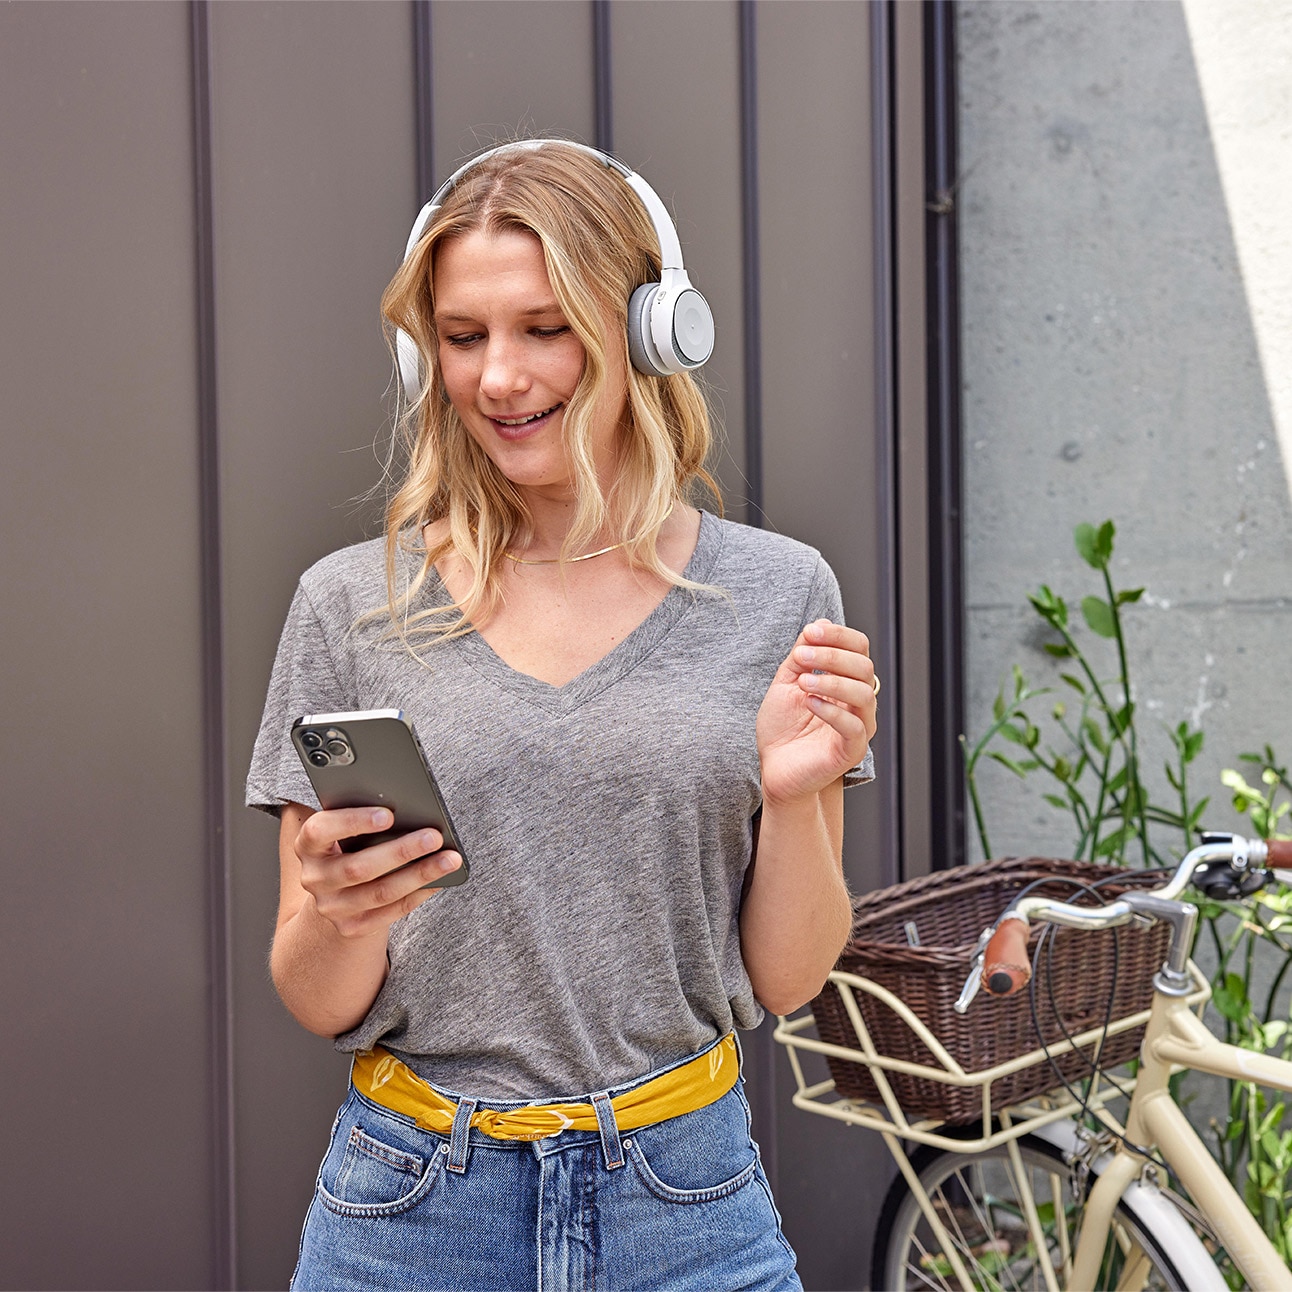 With an iPhone in hand, a professional wearing a Cisco Headset 730 smiles while taking a call outdoors.